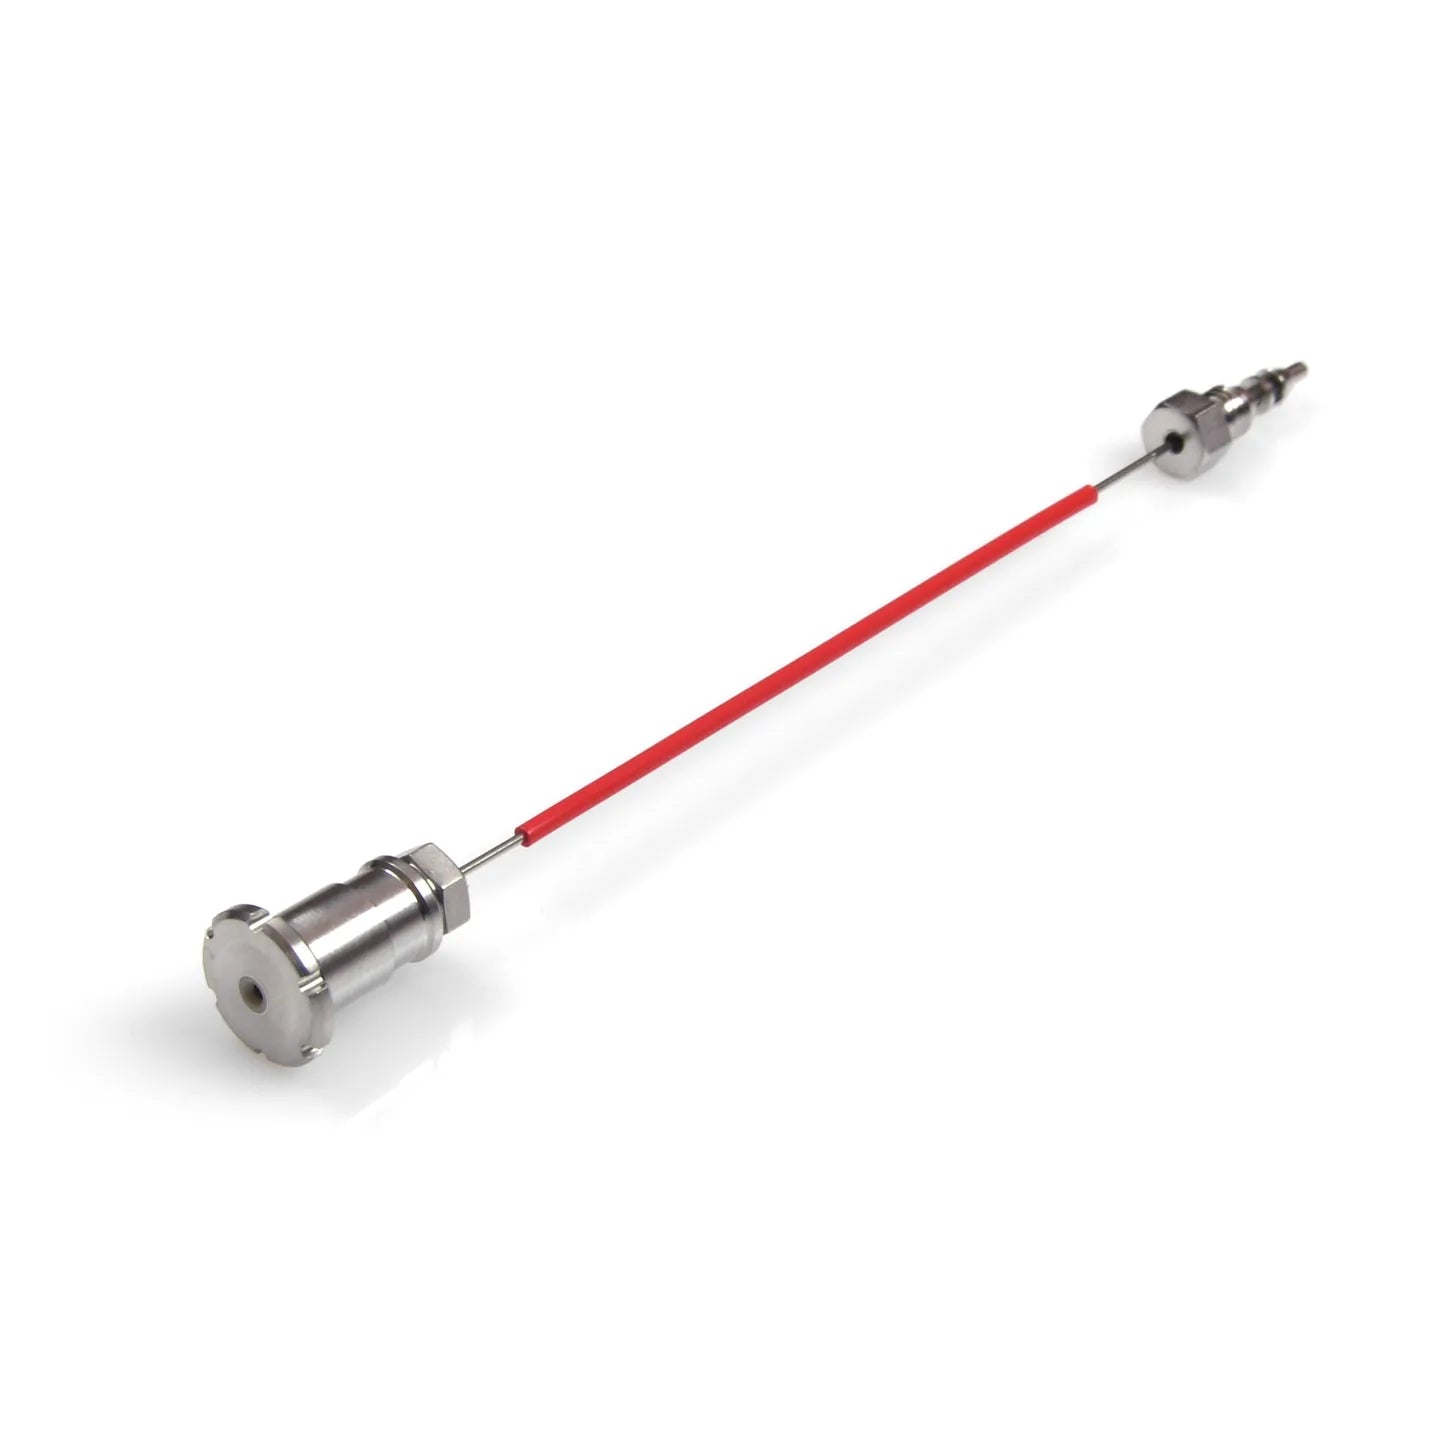 Needle Seat Assembly, PEEK™, 0.12mm ID, Comparable to Agilent # G7129-87012